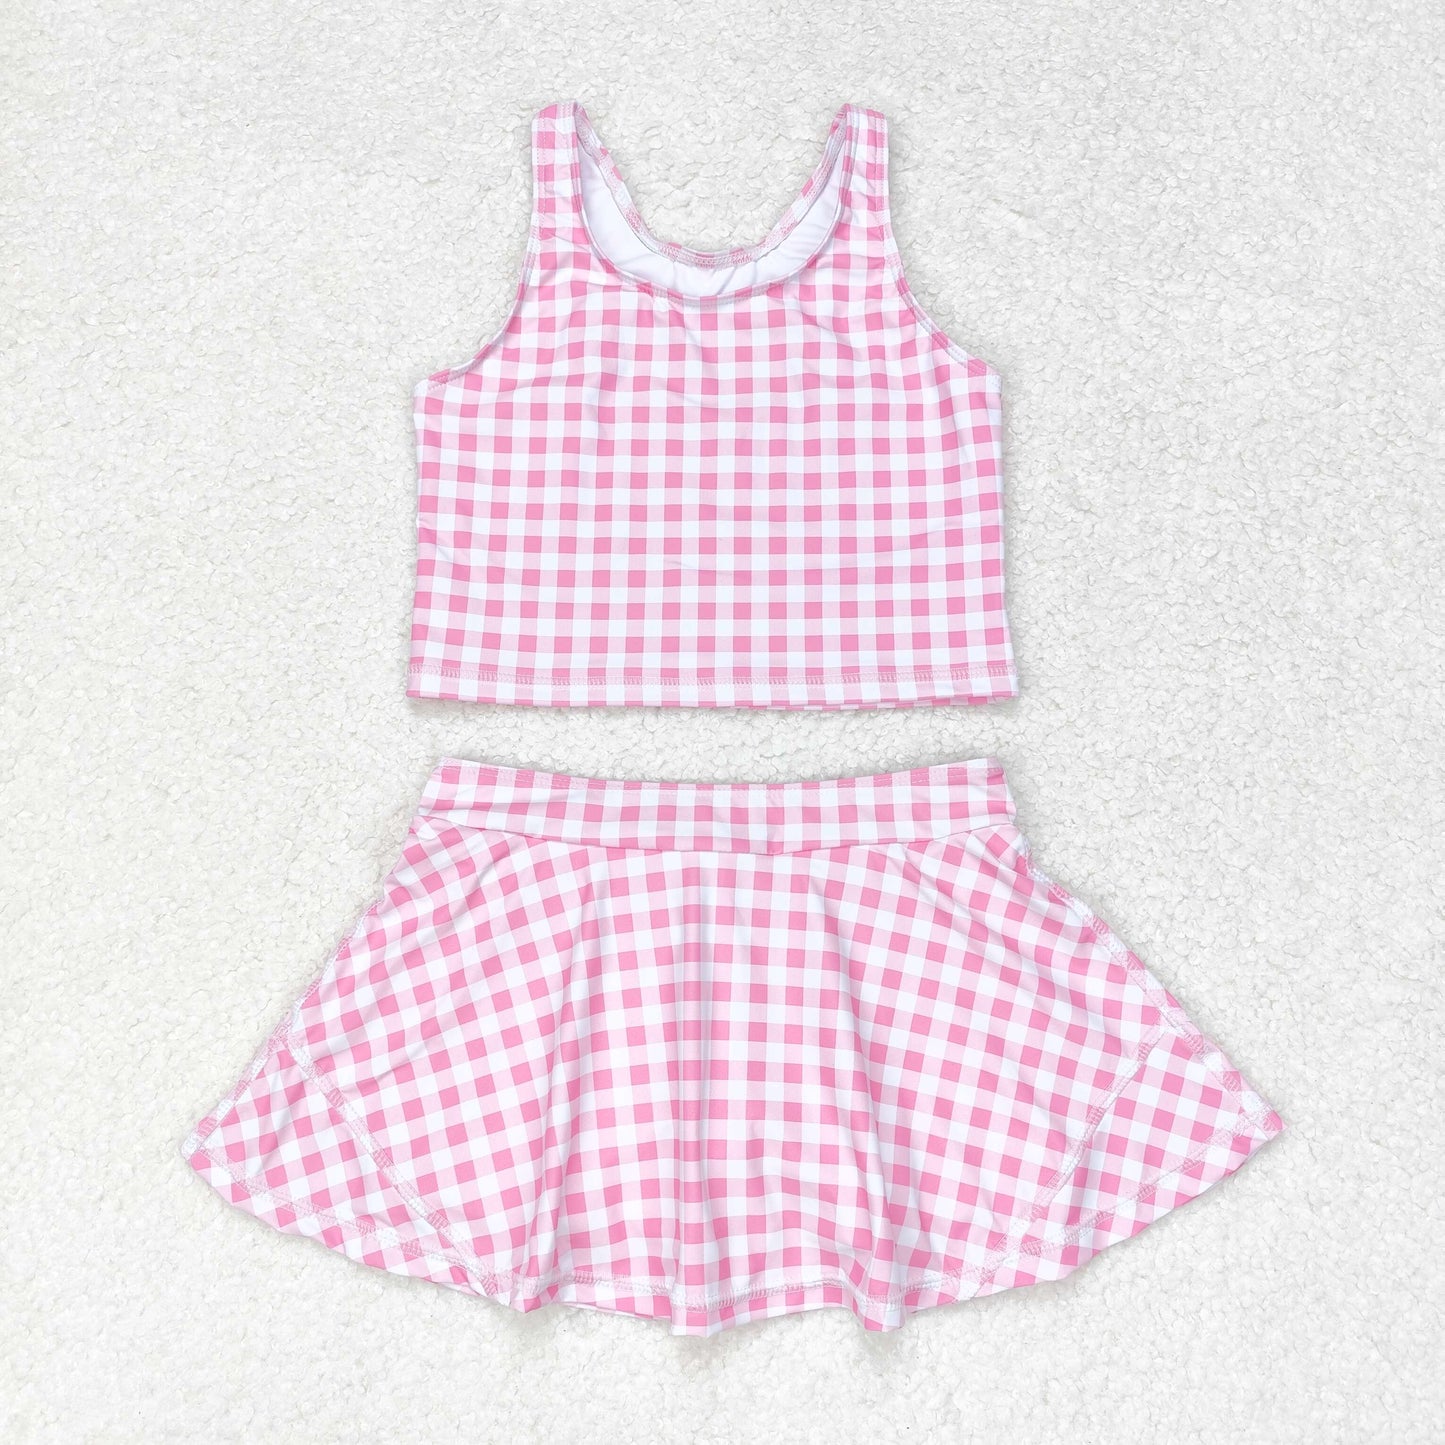 rts no moq GSD0992 Pink and white plaid sleeveless skirt suit